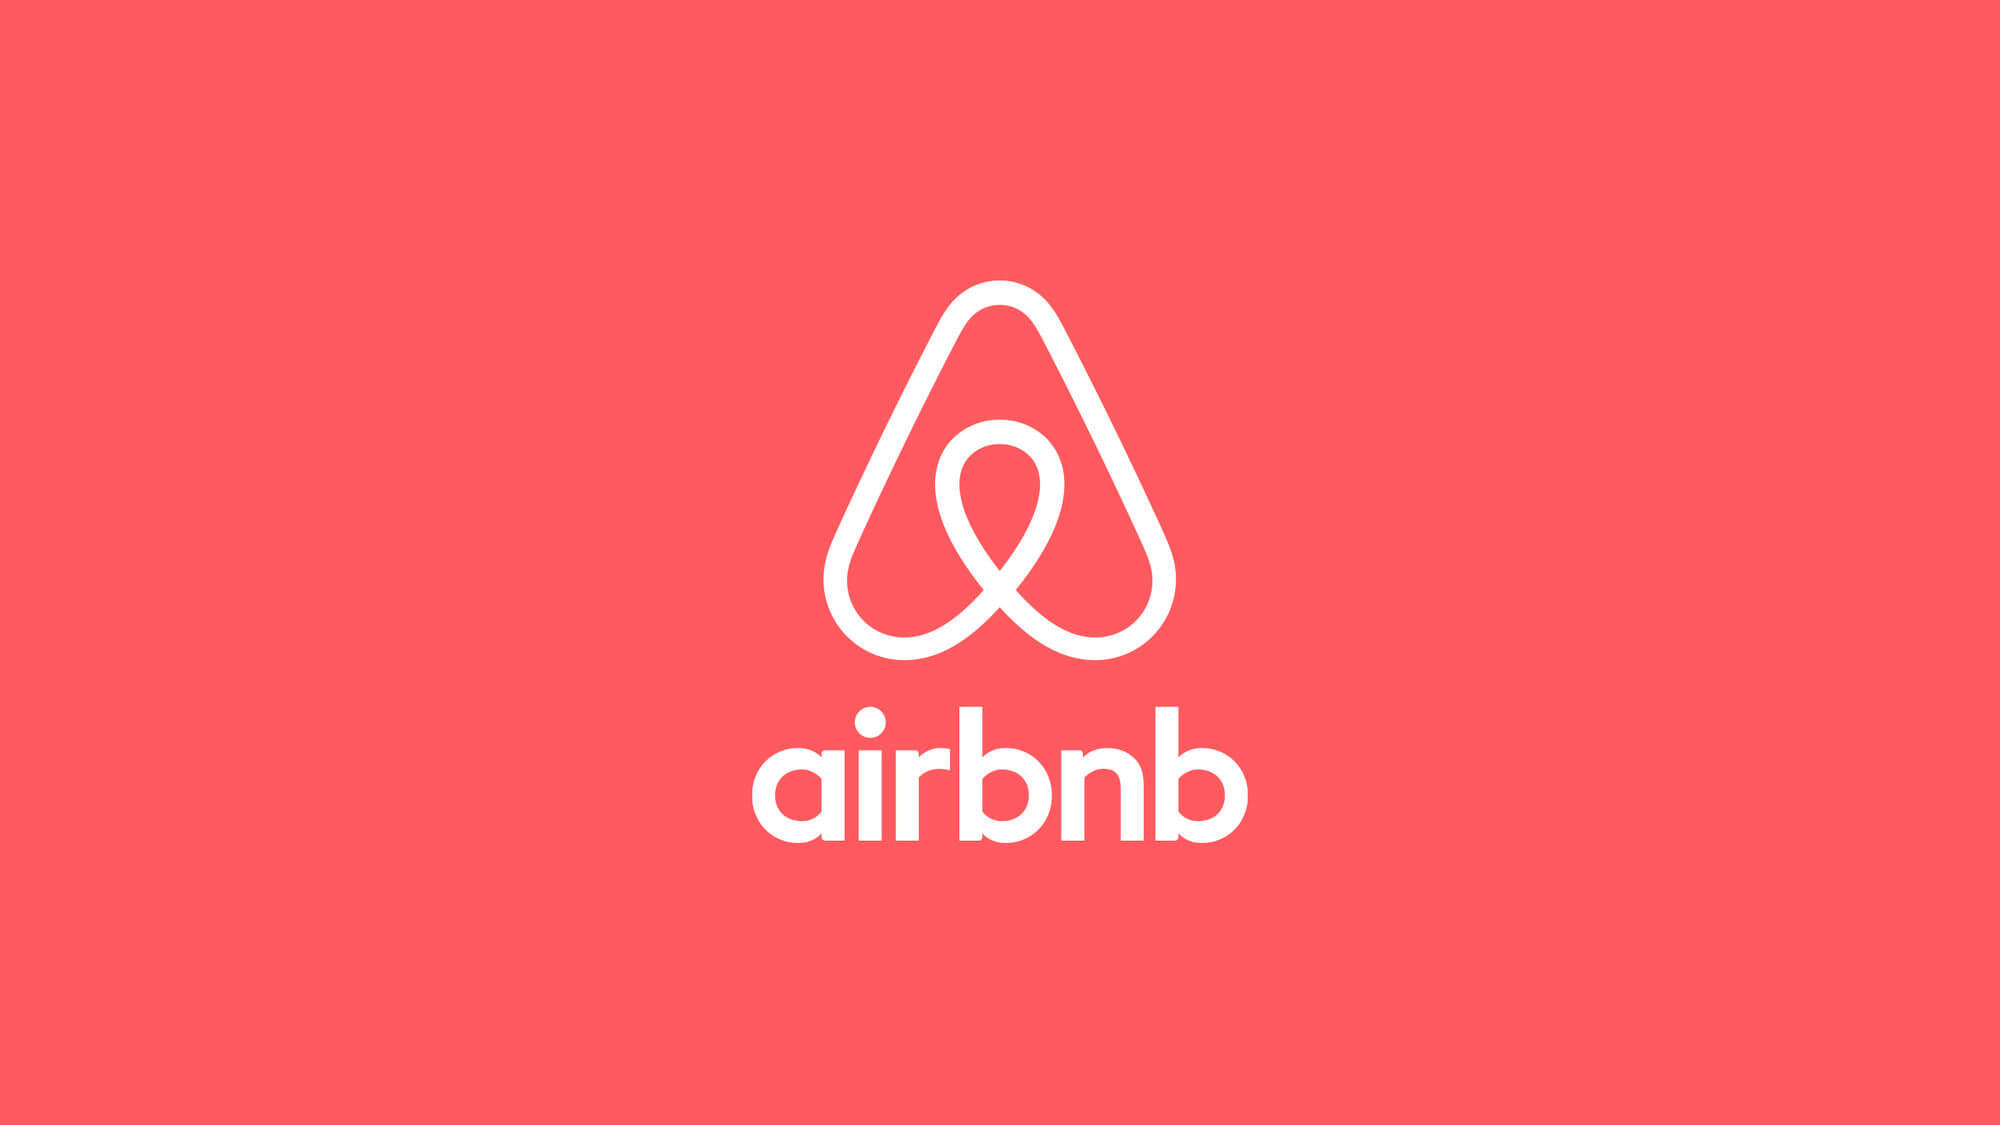 The 25 Best Companies To Work For In 2016 - Airbnb